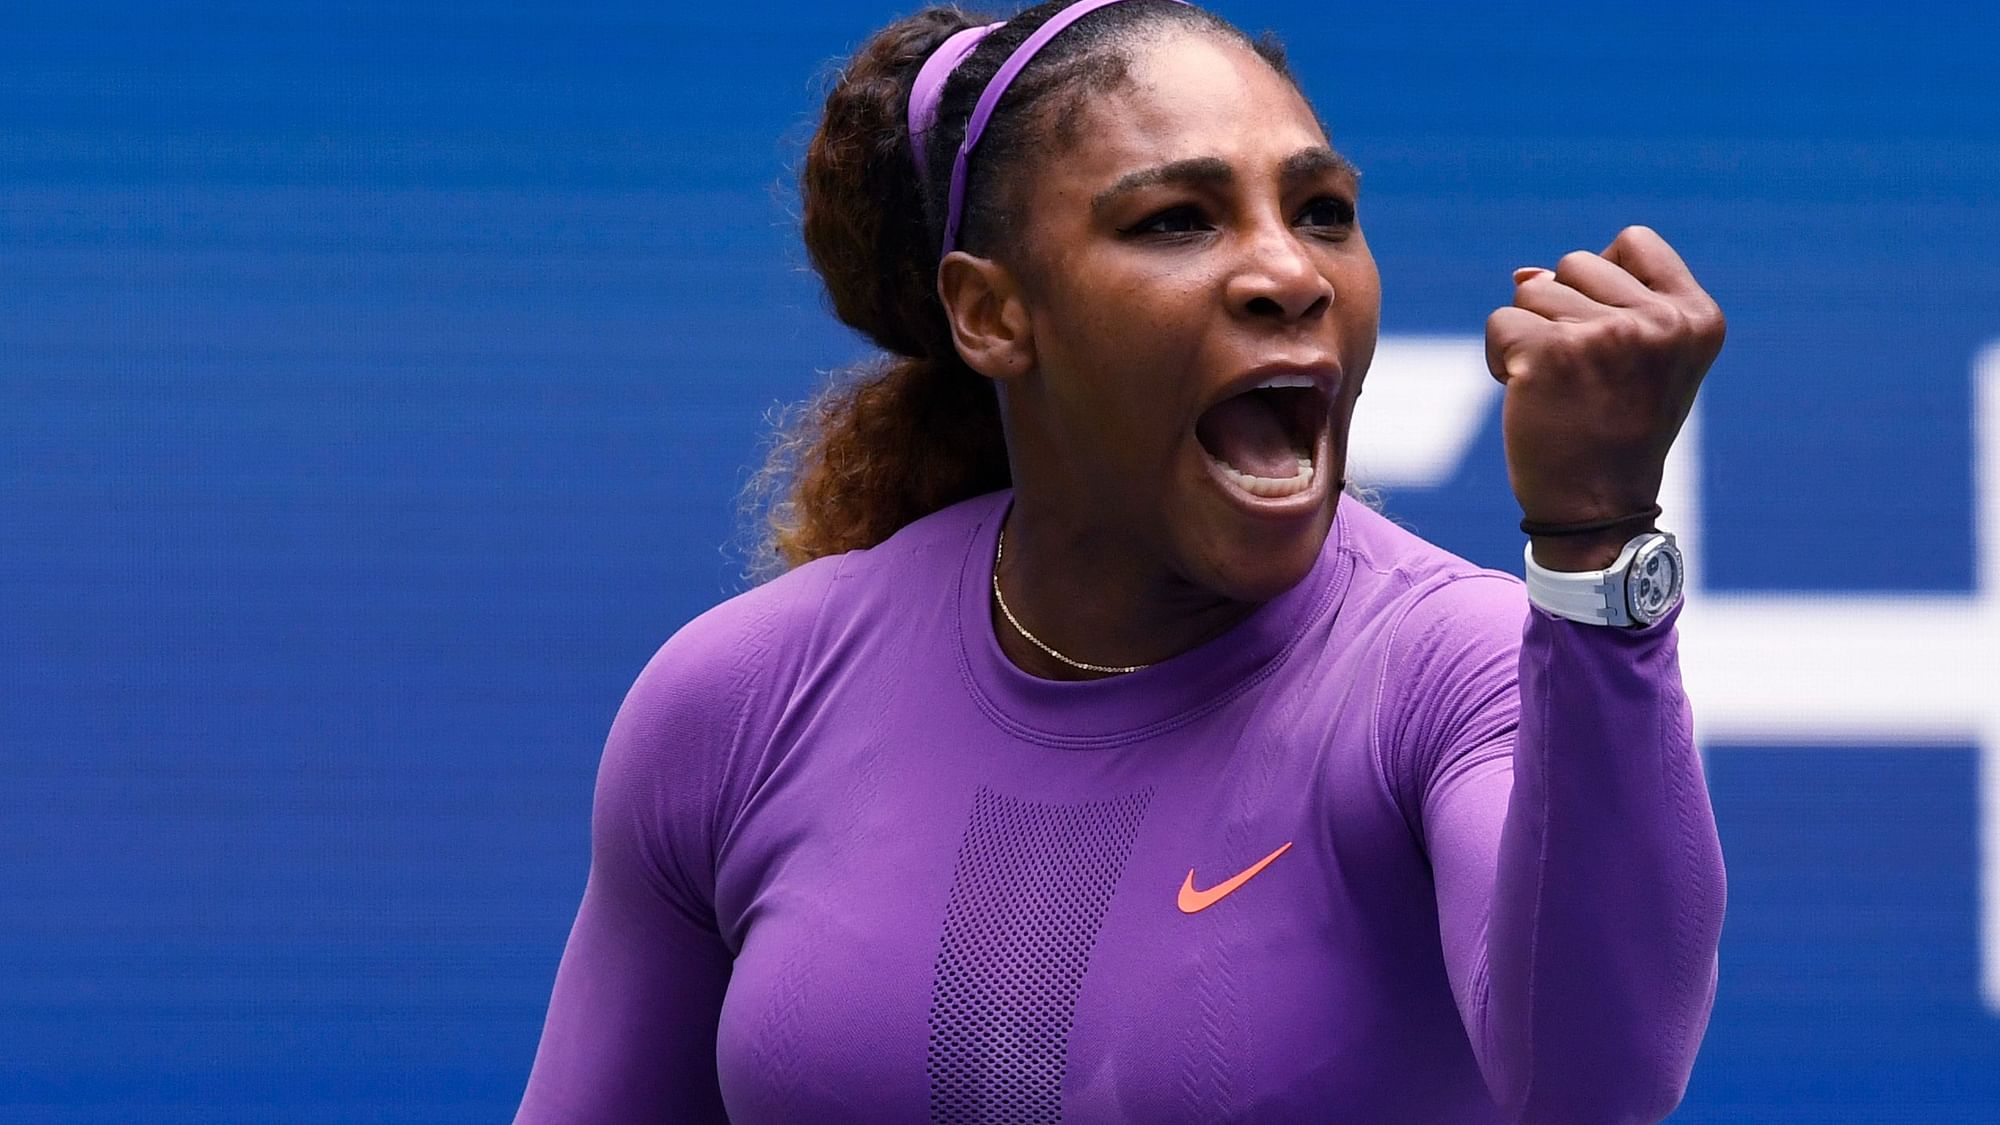 Serena Williams, a six-time US Open winner, romped to a 6-3, 6-4 victory over Croatian 22nd seed Petra Martic